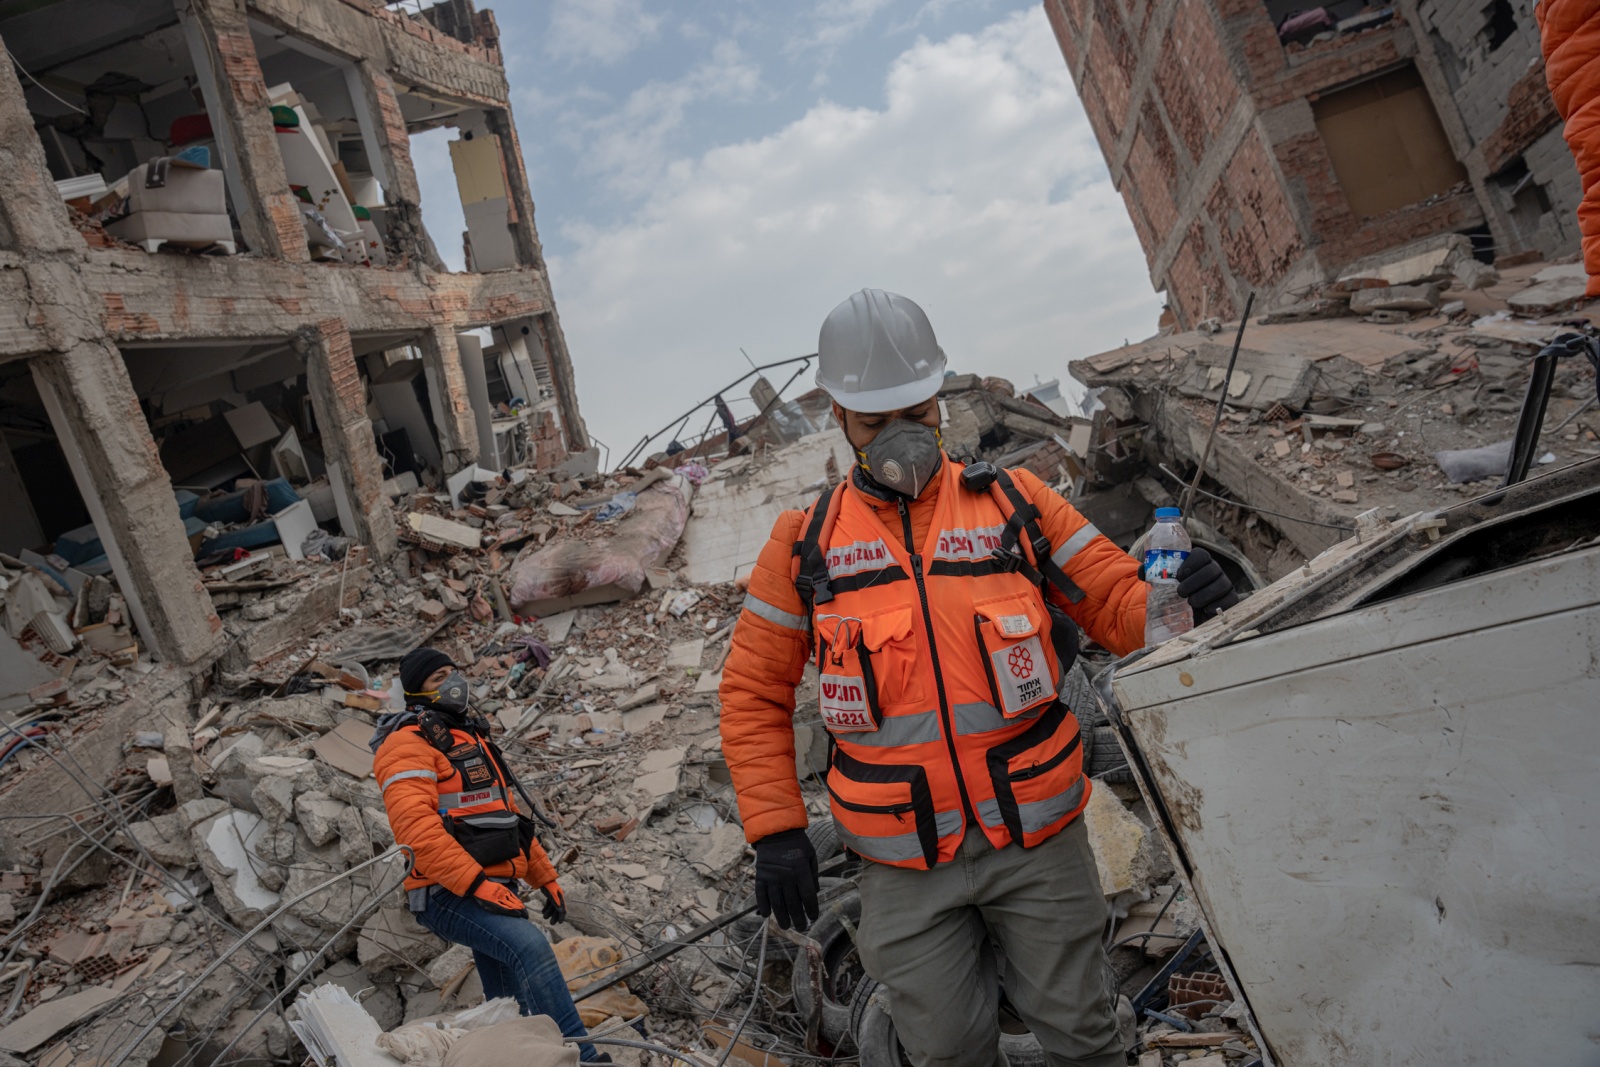 Israeli search and rescue teams have been at the site of the deadly earthquake since last week. Photo by Erik Marmor/Flash90